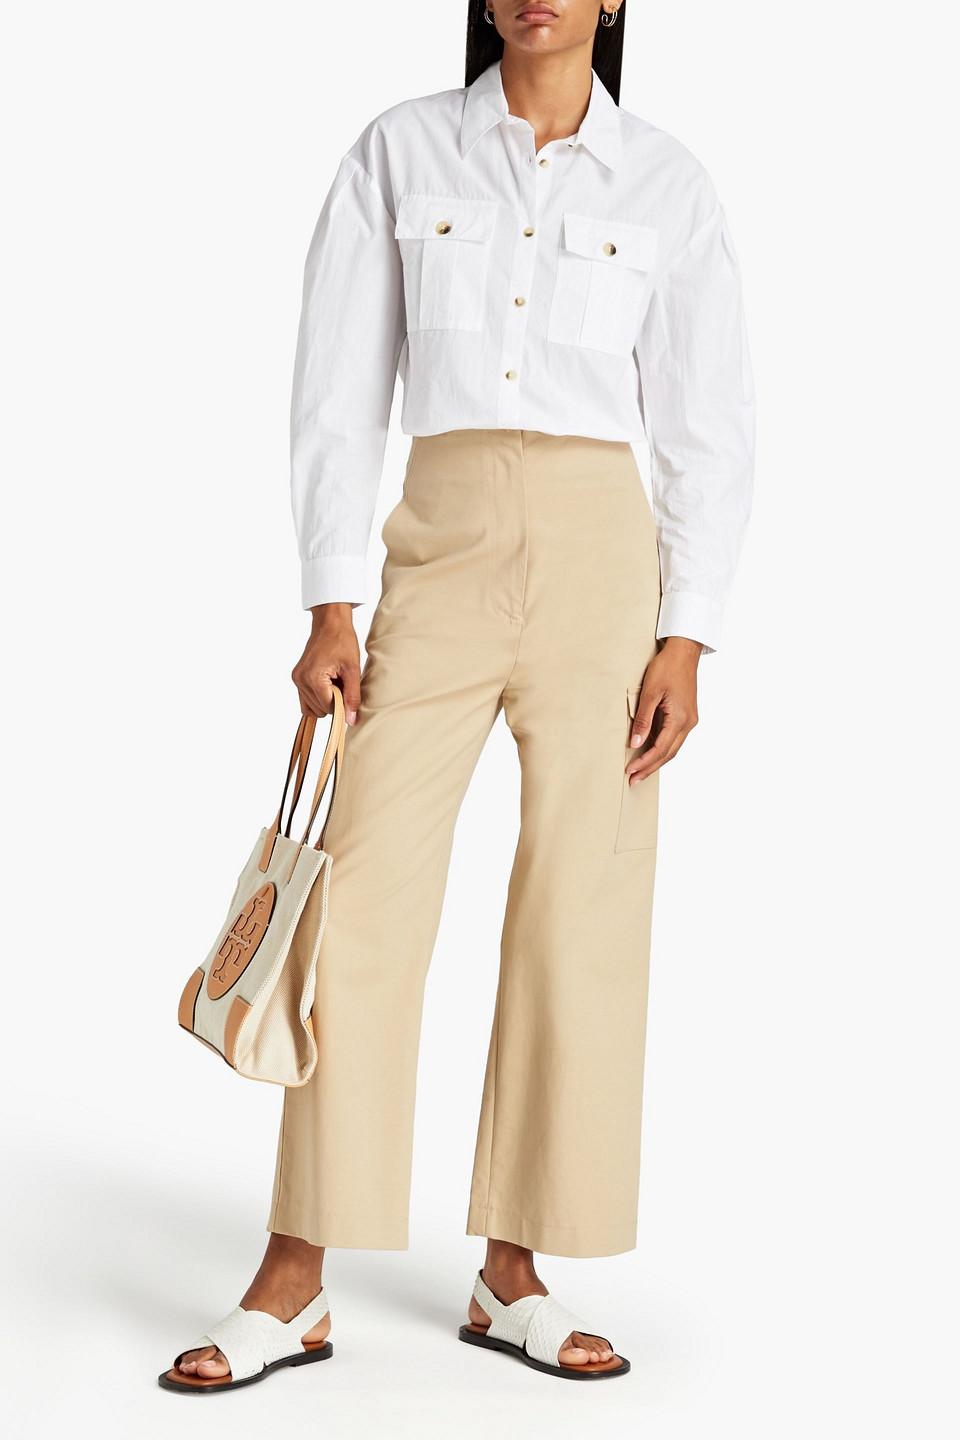 Ba&sh Chemise Pleated Cotton Shirt in White | Lyst